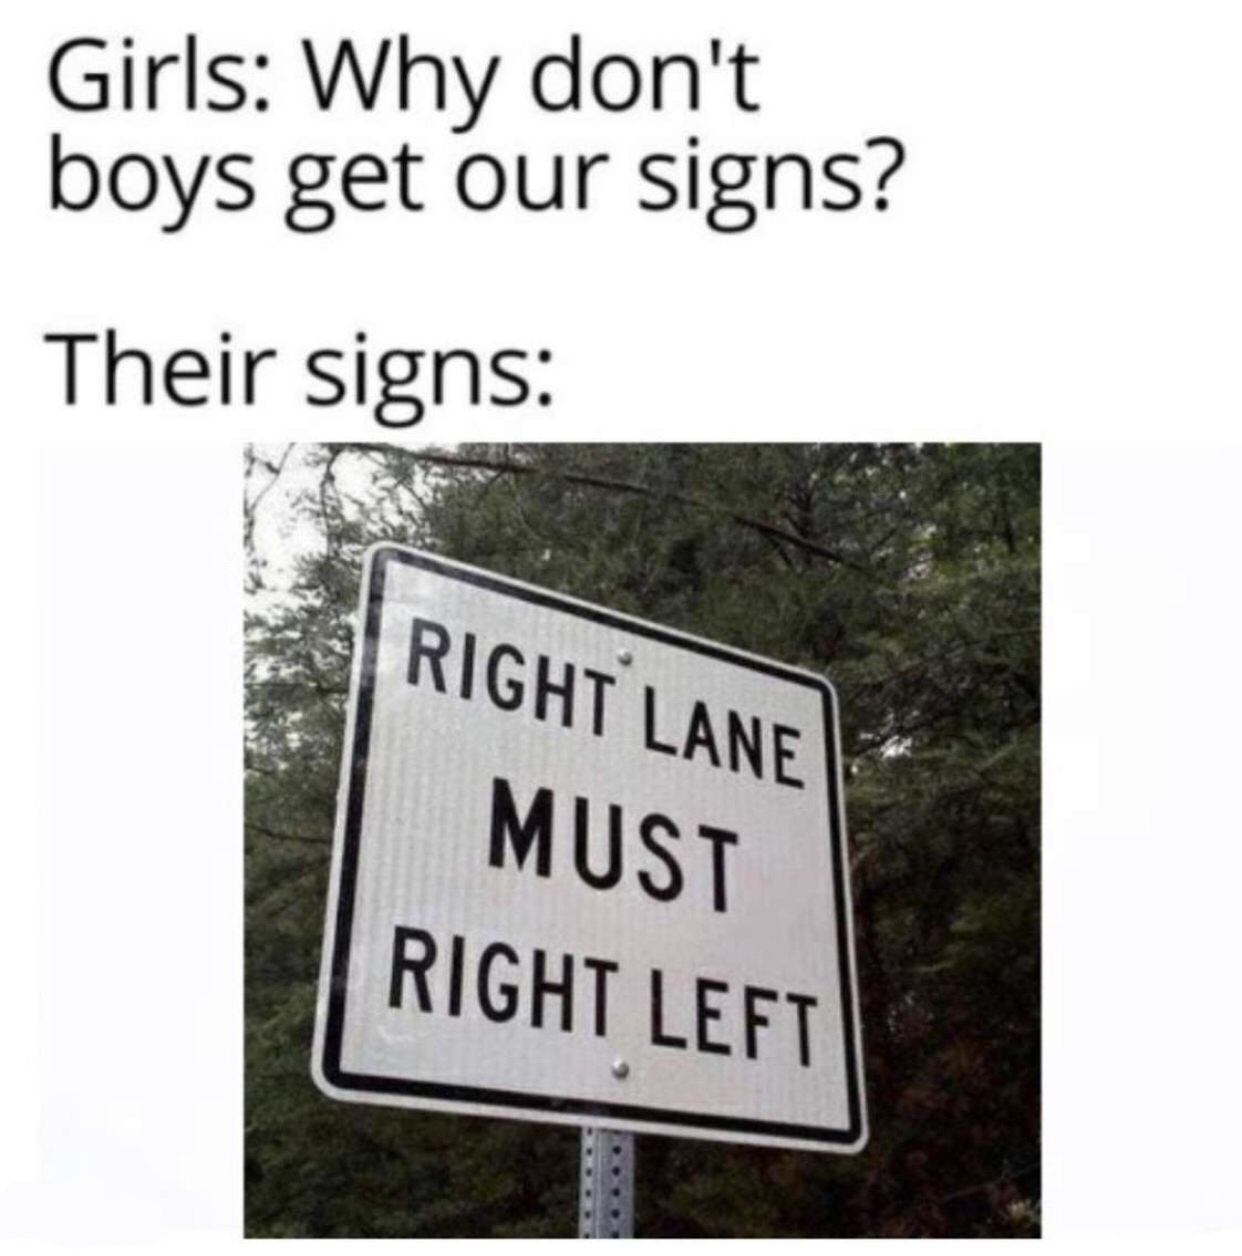 sign - Girls Why don't boys get our signs? Their signs Right Lane Must Right Left